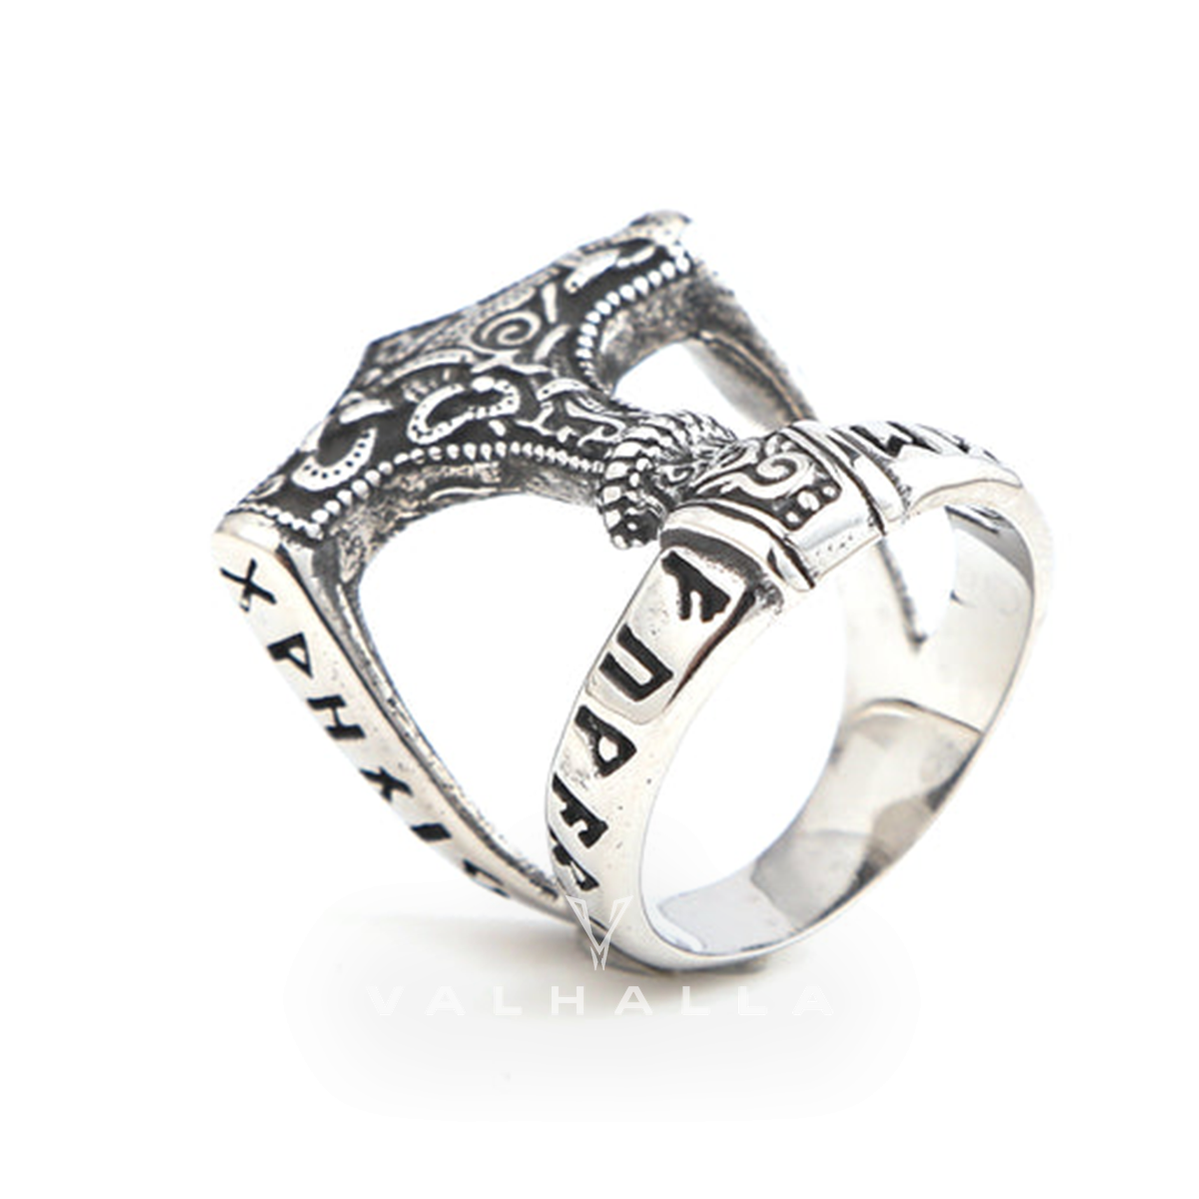 Handcrafted Stainless Steel Open Thor's Hammer Ring